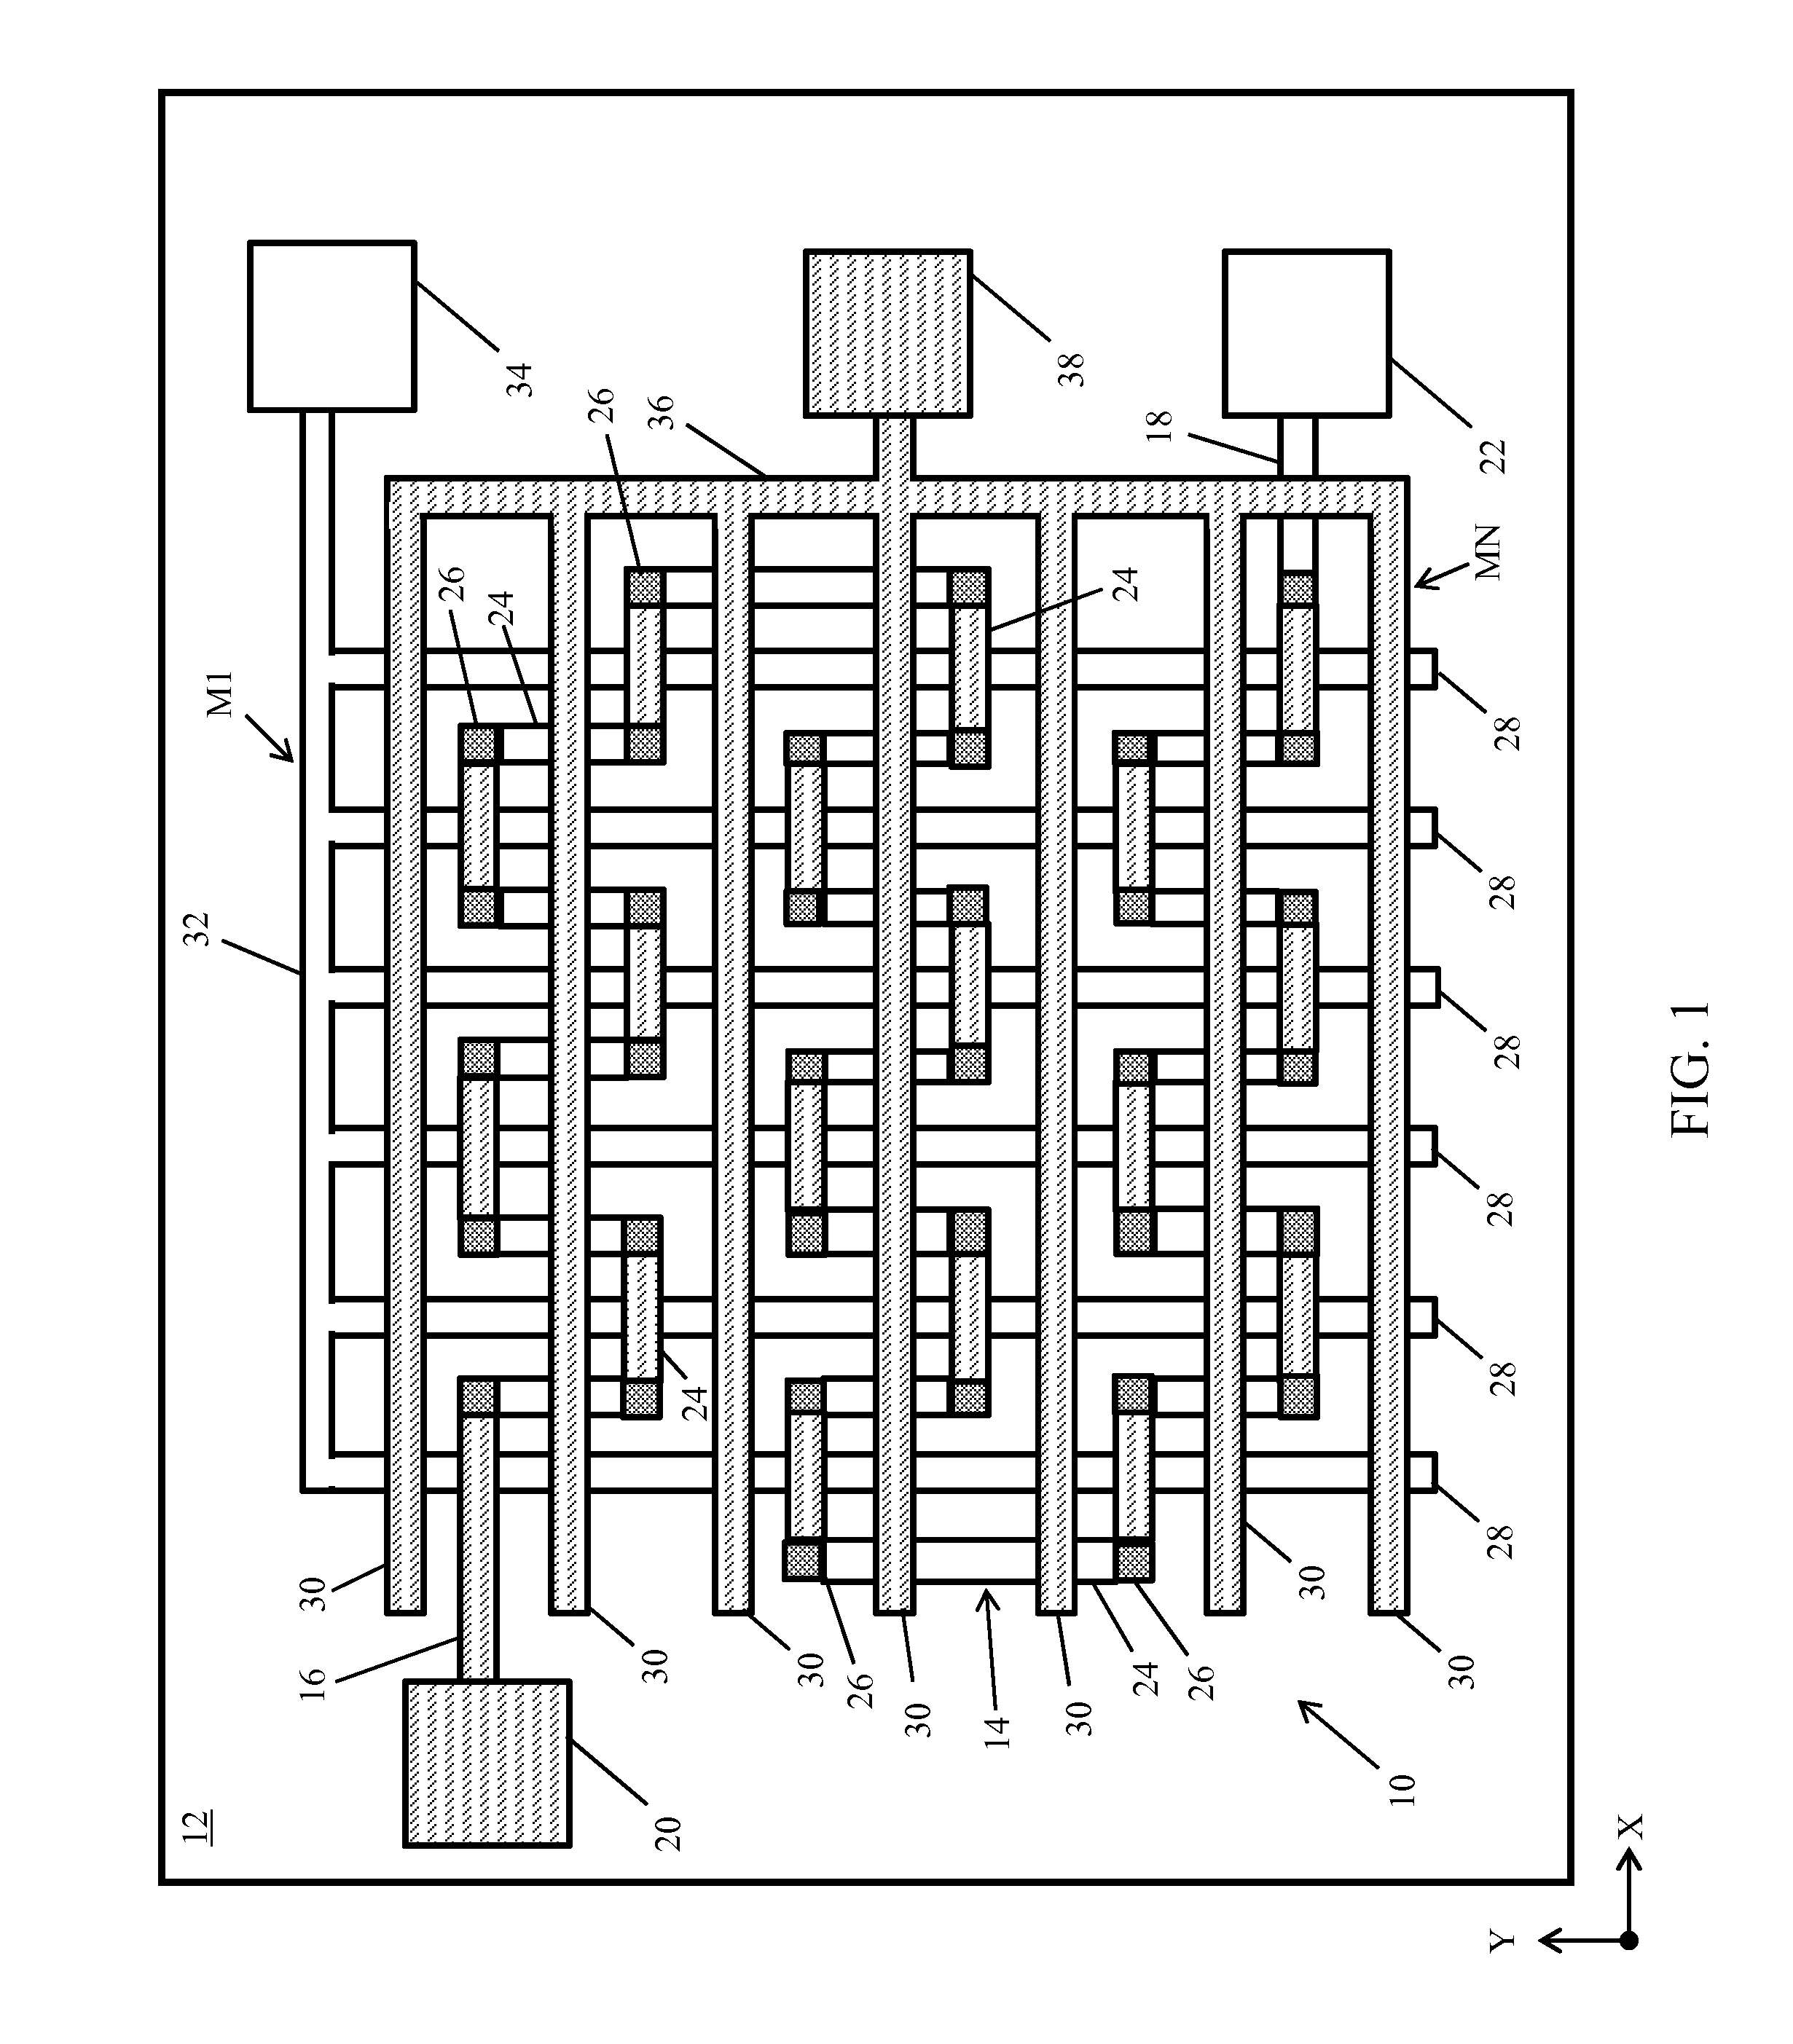 Integrated circuit (IC) test structure with monitor chain and test wires